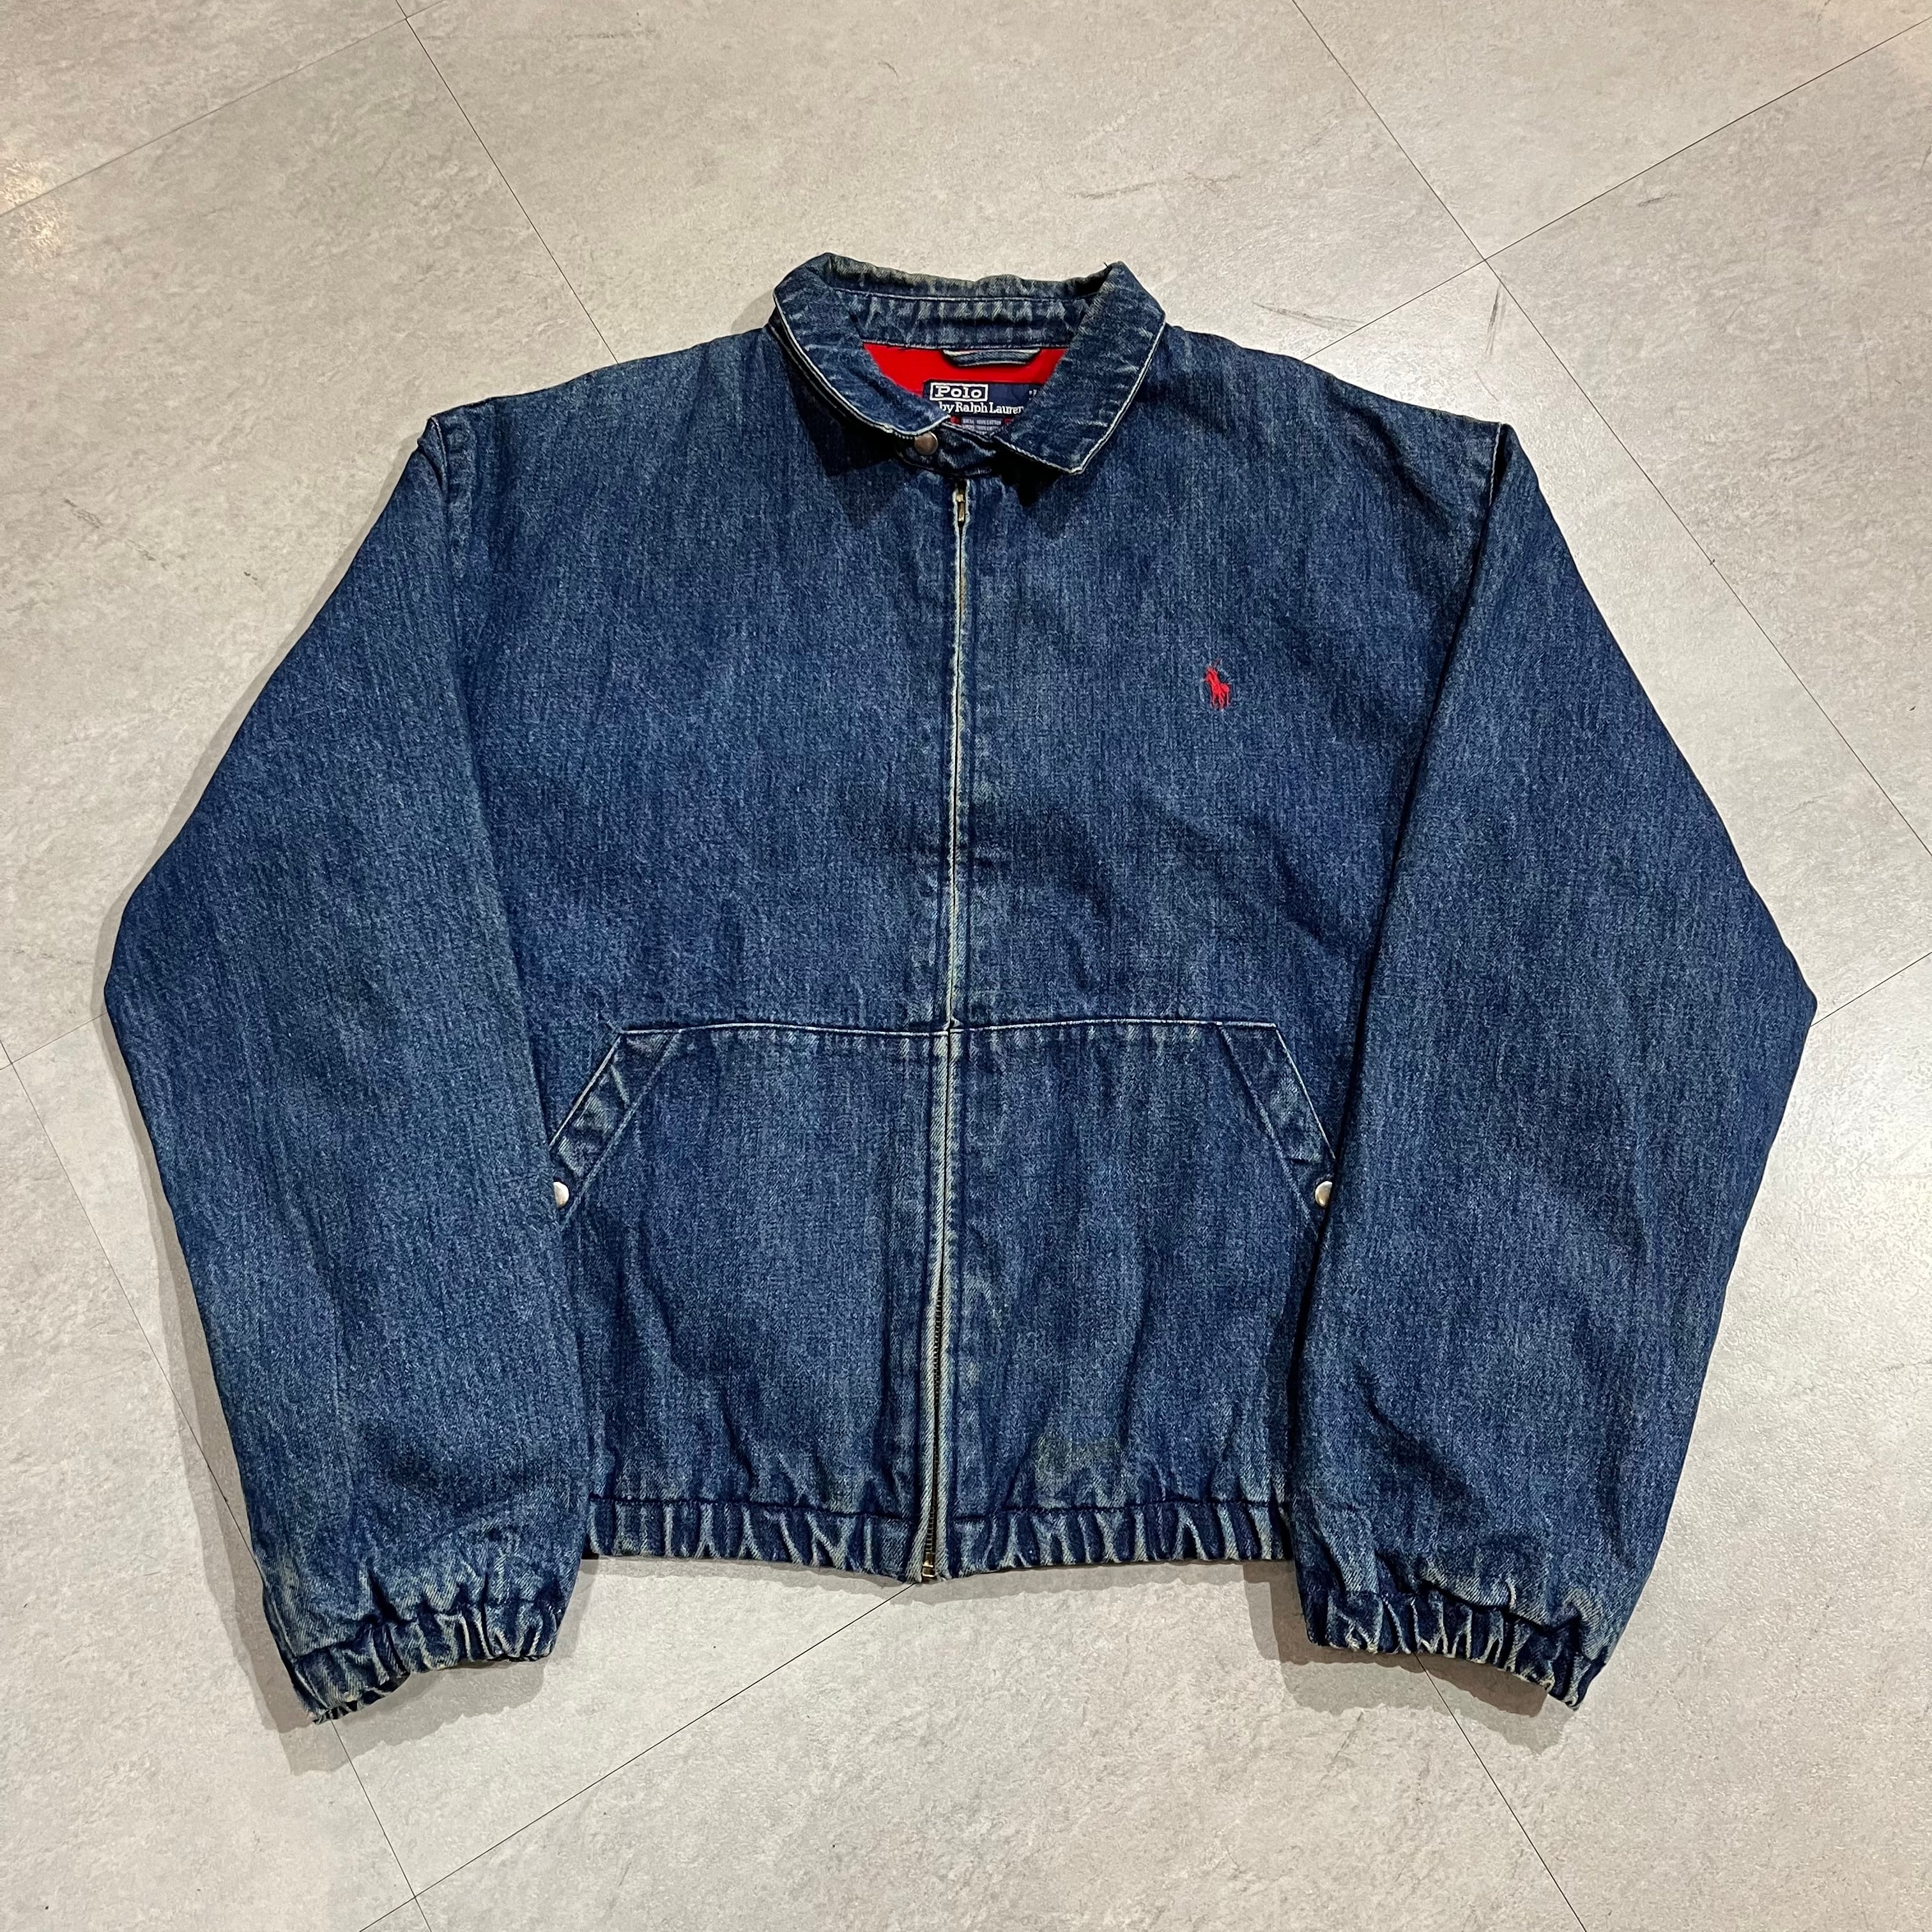 size:XL【 Polo by Ralph Lauren 】ラルフローレン スイングトップ